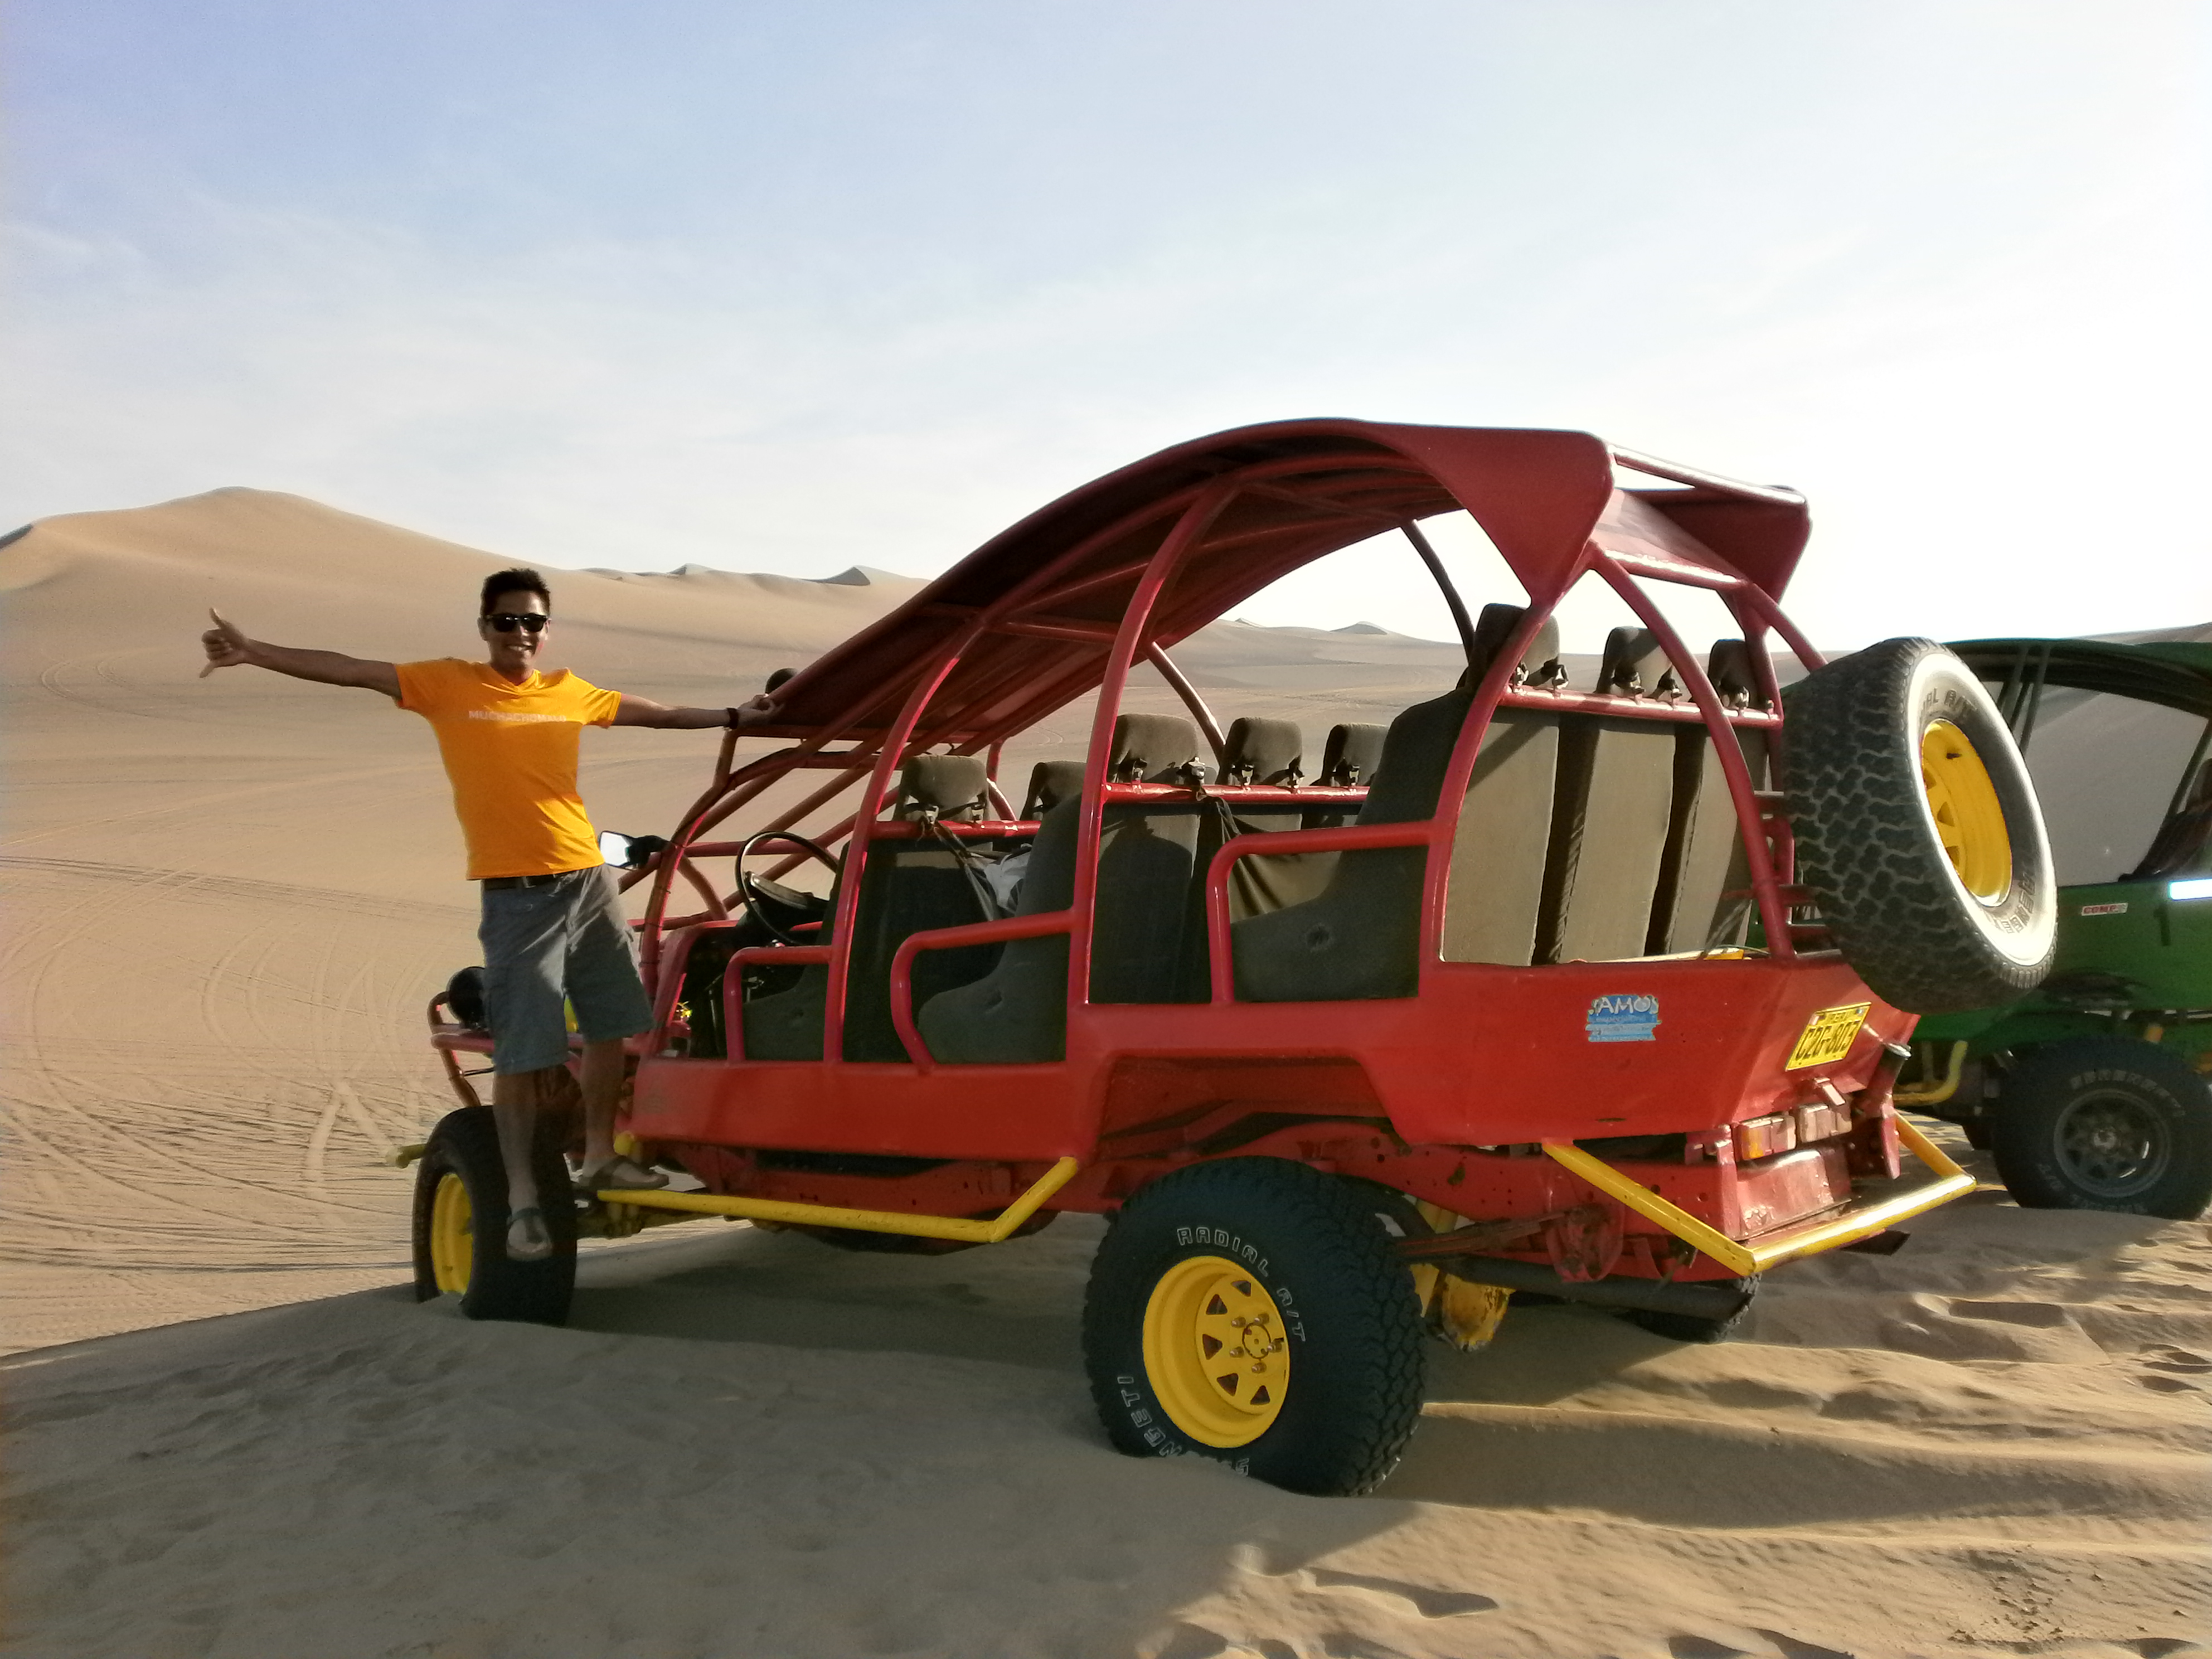 Buggy's in Huacachina